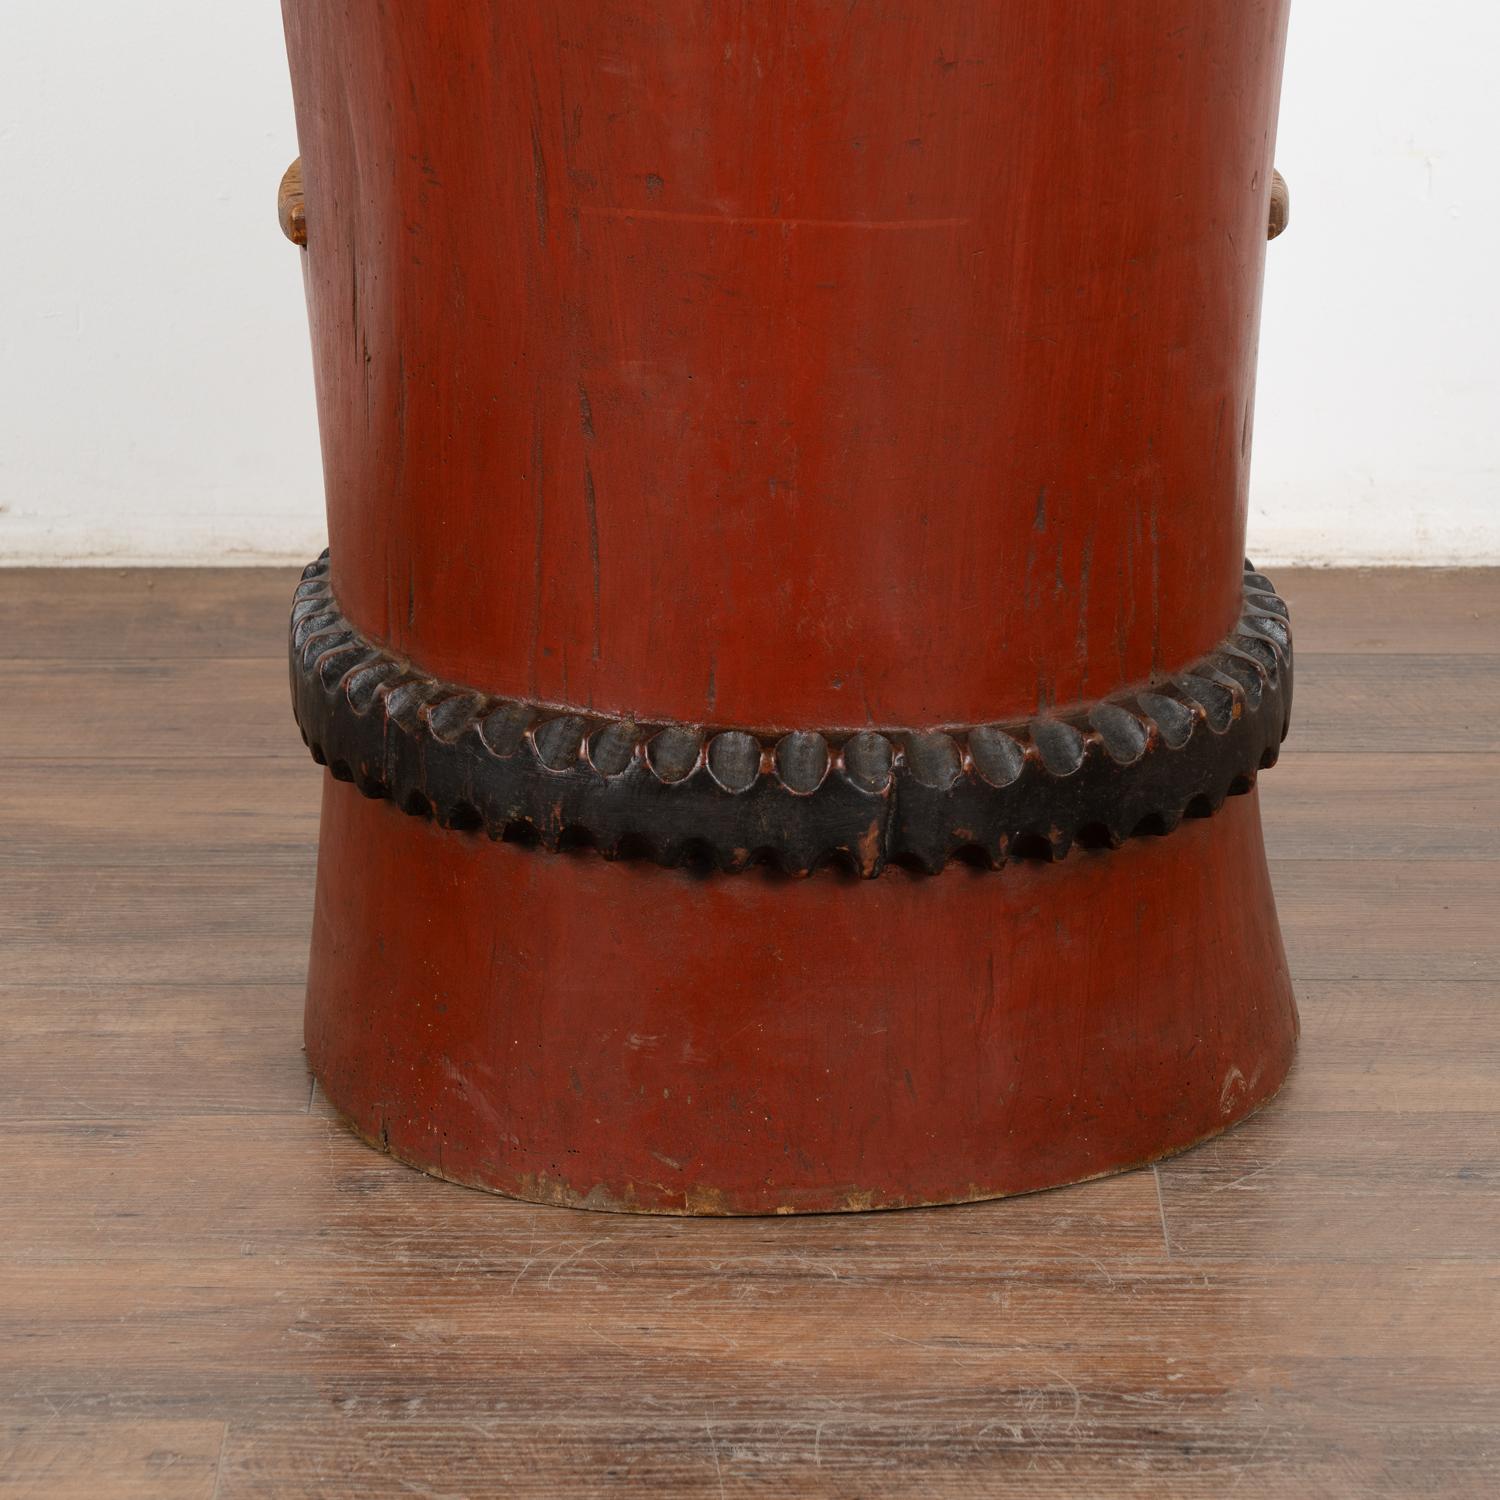 Original Red Painted Kubbestol Log Chair, Sweden circa 1860-80 For Sale 1